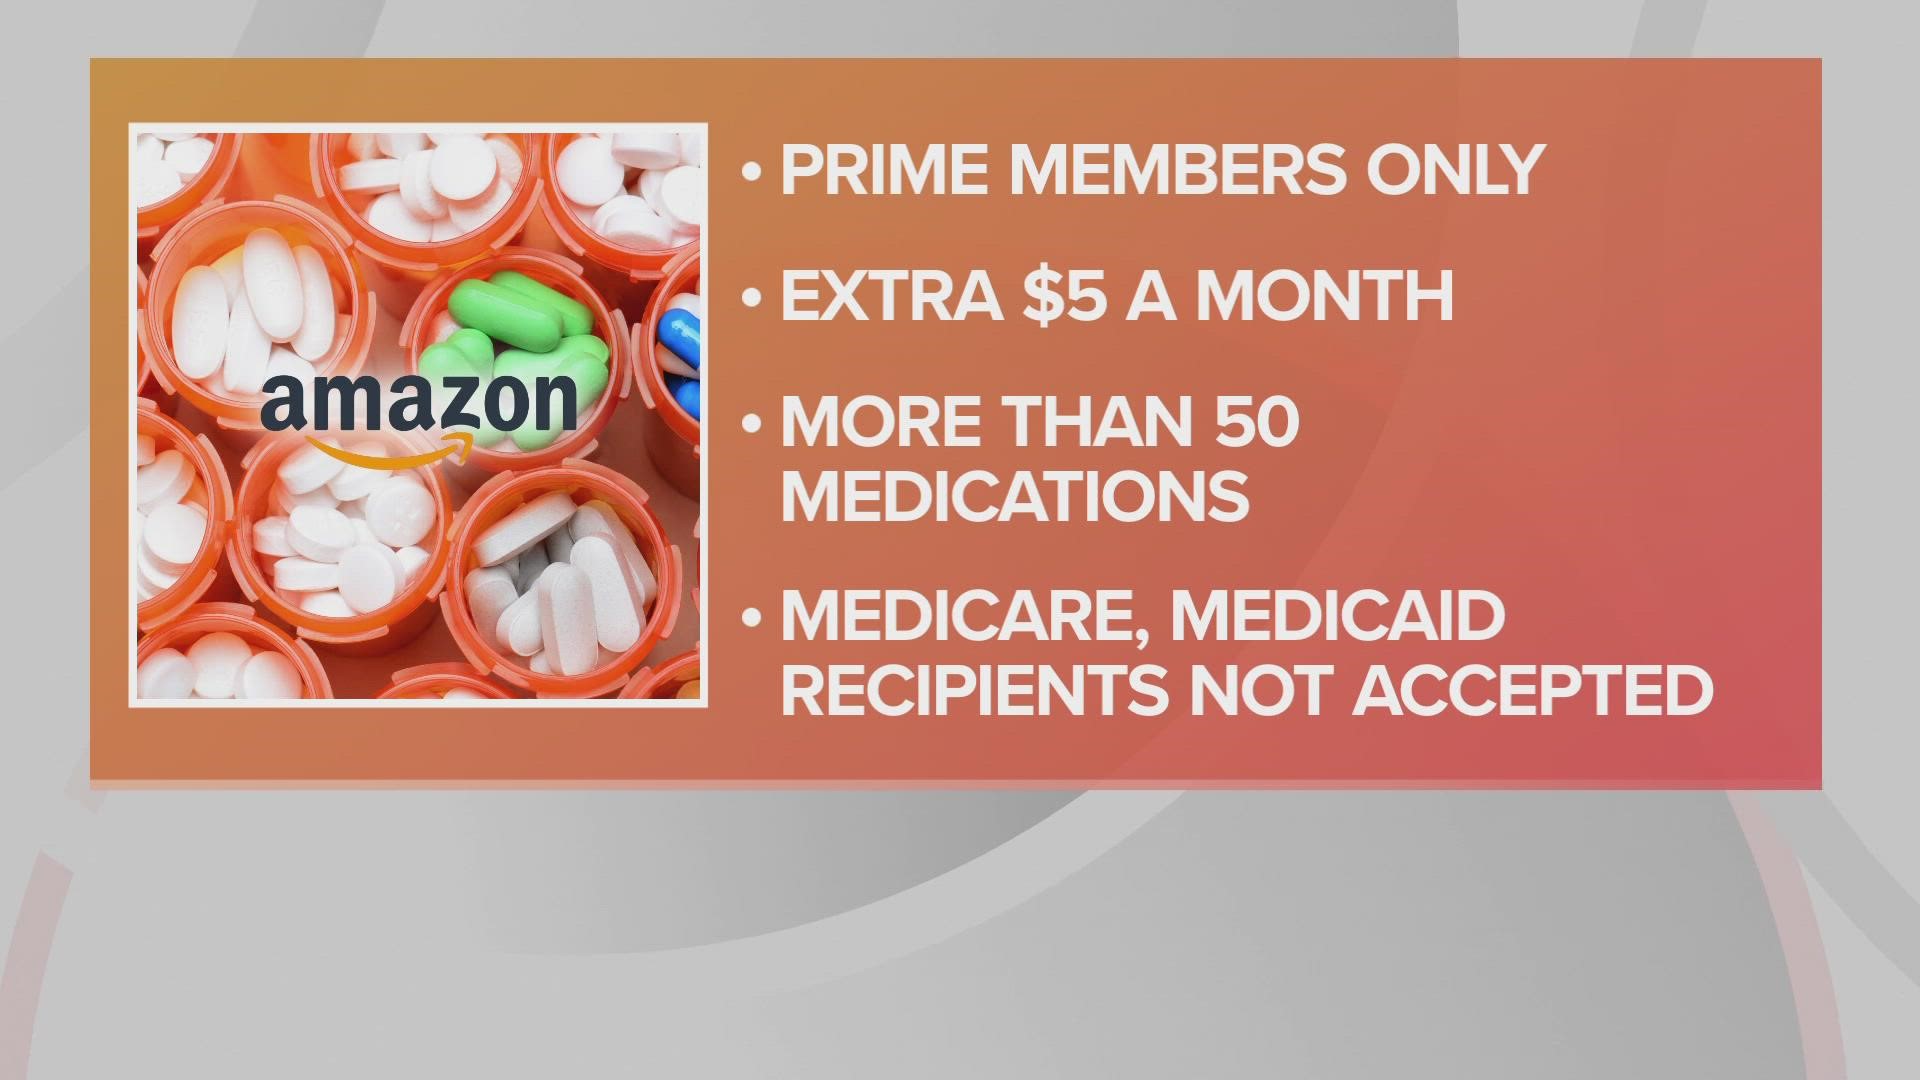 Amazon said people will pay $5 a month to fill as many prescriptions as they need from a list of about 50 generic meds.